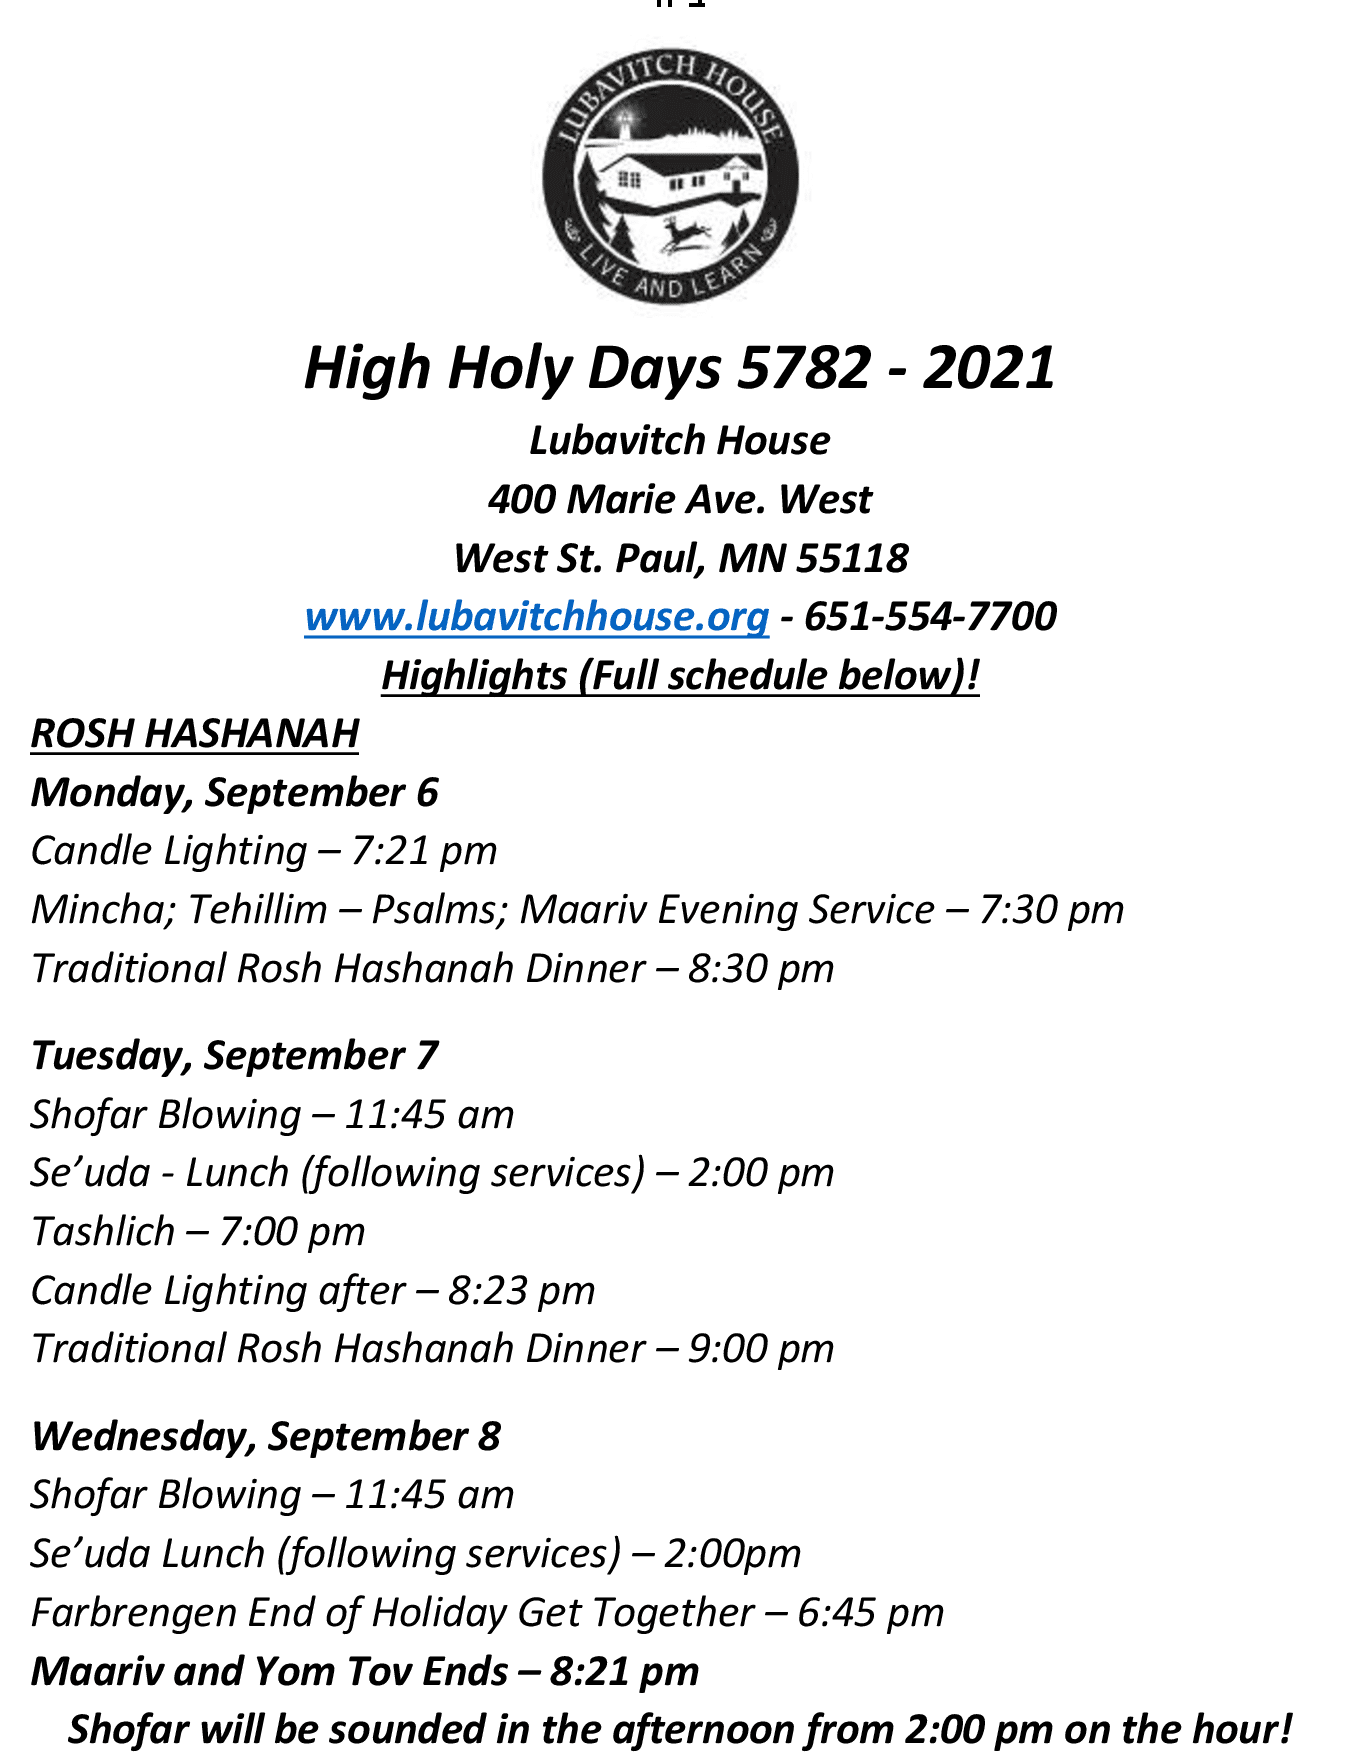 High Holiday Schedule